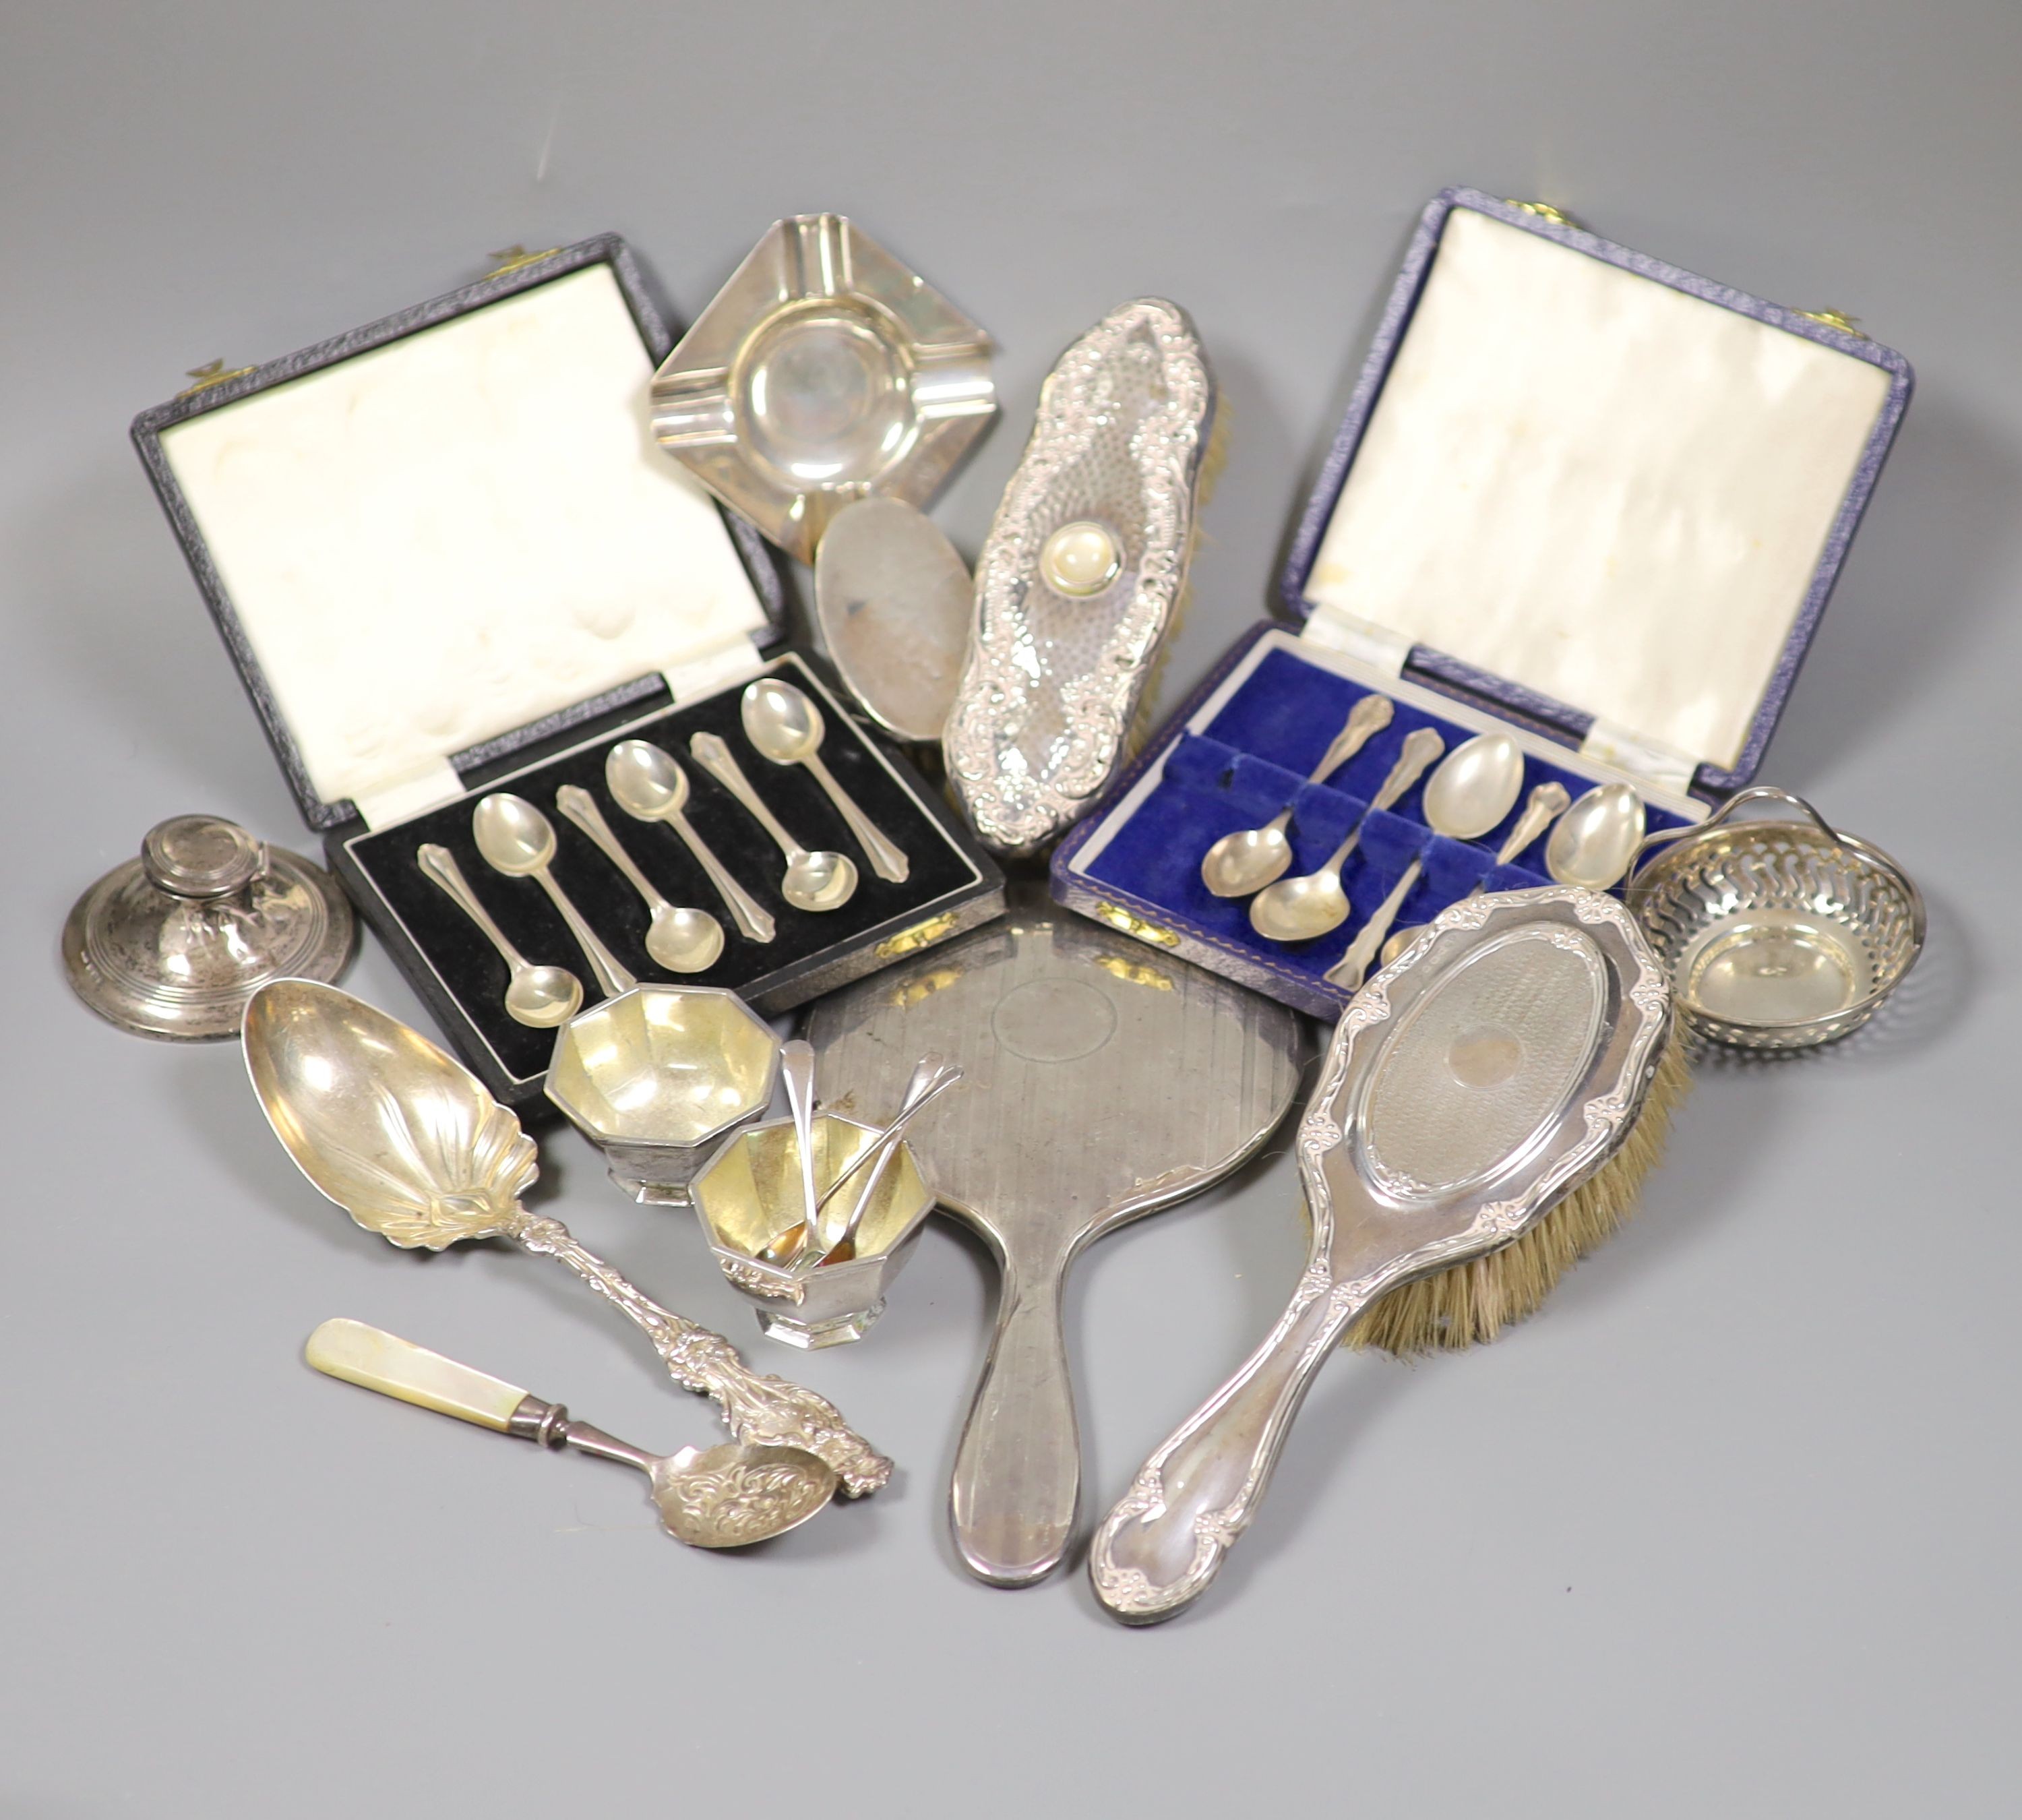 A collection of small silver including condiments, mirror and brushes, astray, cased items and a pair of sterling servers.